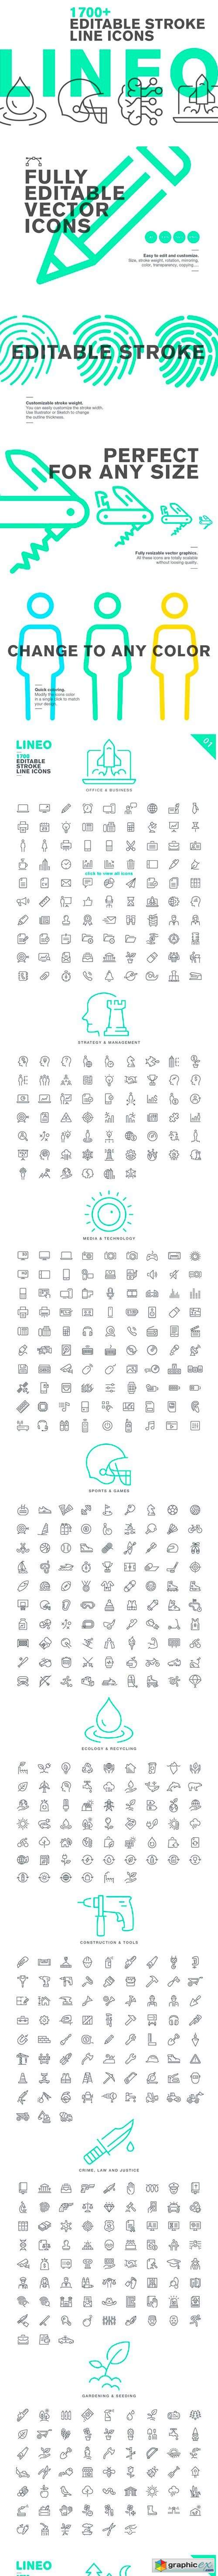 LINEO - 1700+ fully editable icons